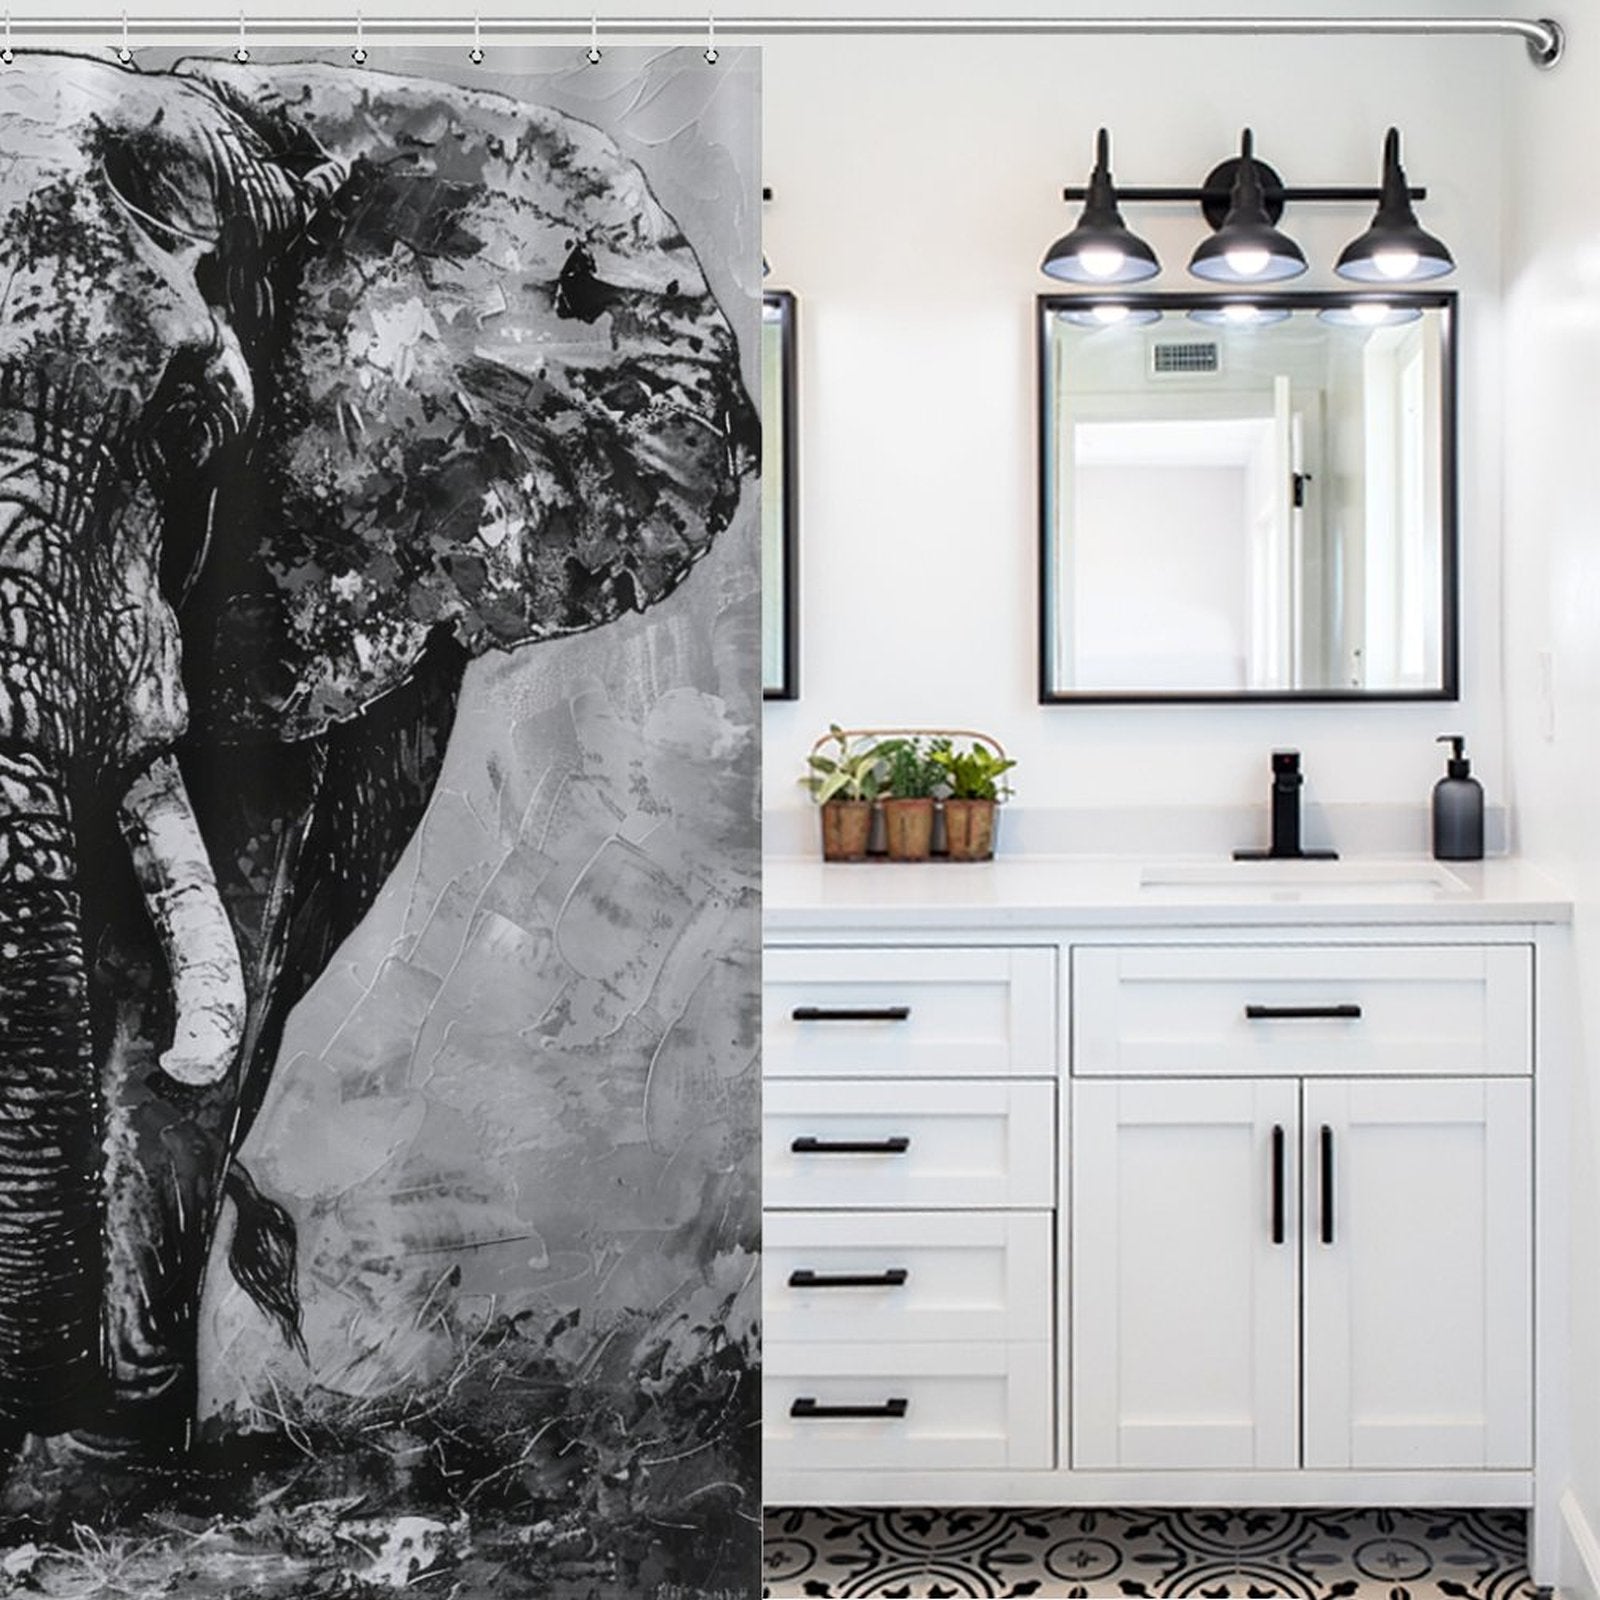 A modern bathroom with white cabinets, black fixtures, a double vanity, and a large mirror. The shower features an elegant Black and White Elephant Shower Curtain-Cottoncat by Cotton Cat that adds a touch of sophistication to the bathroom decor.